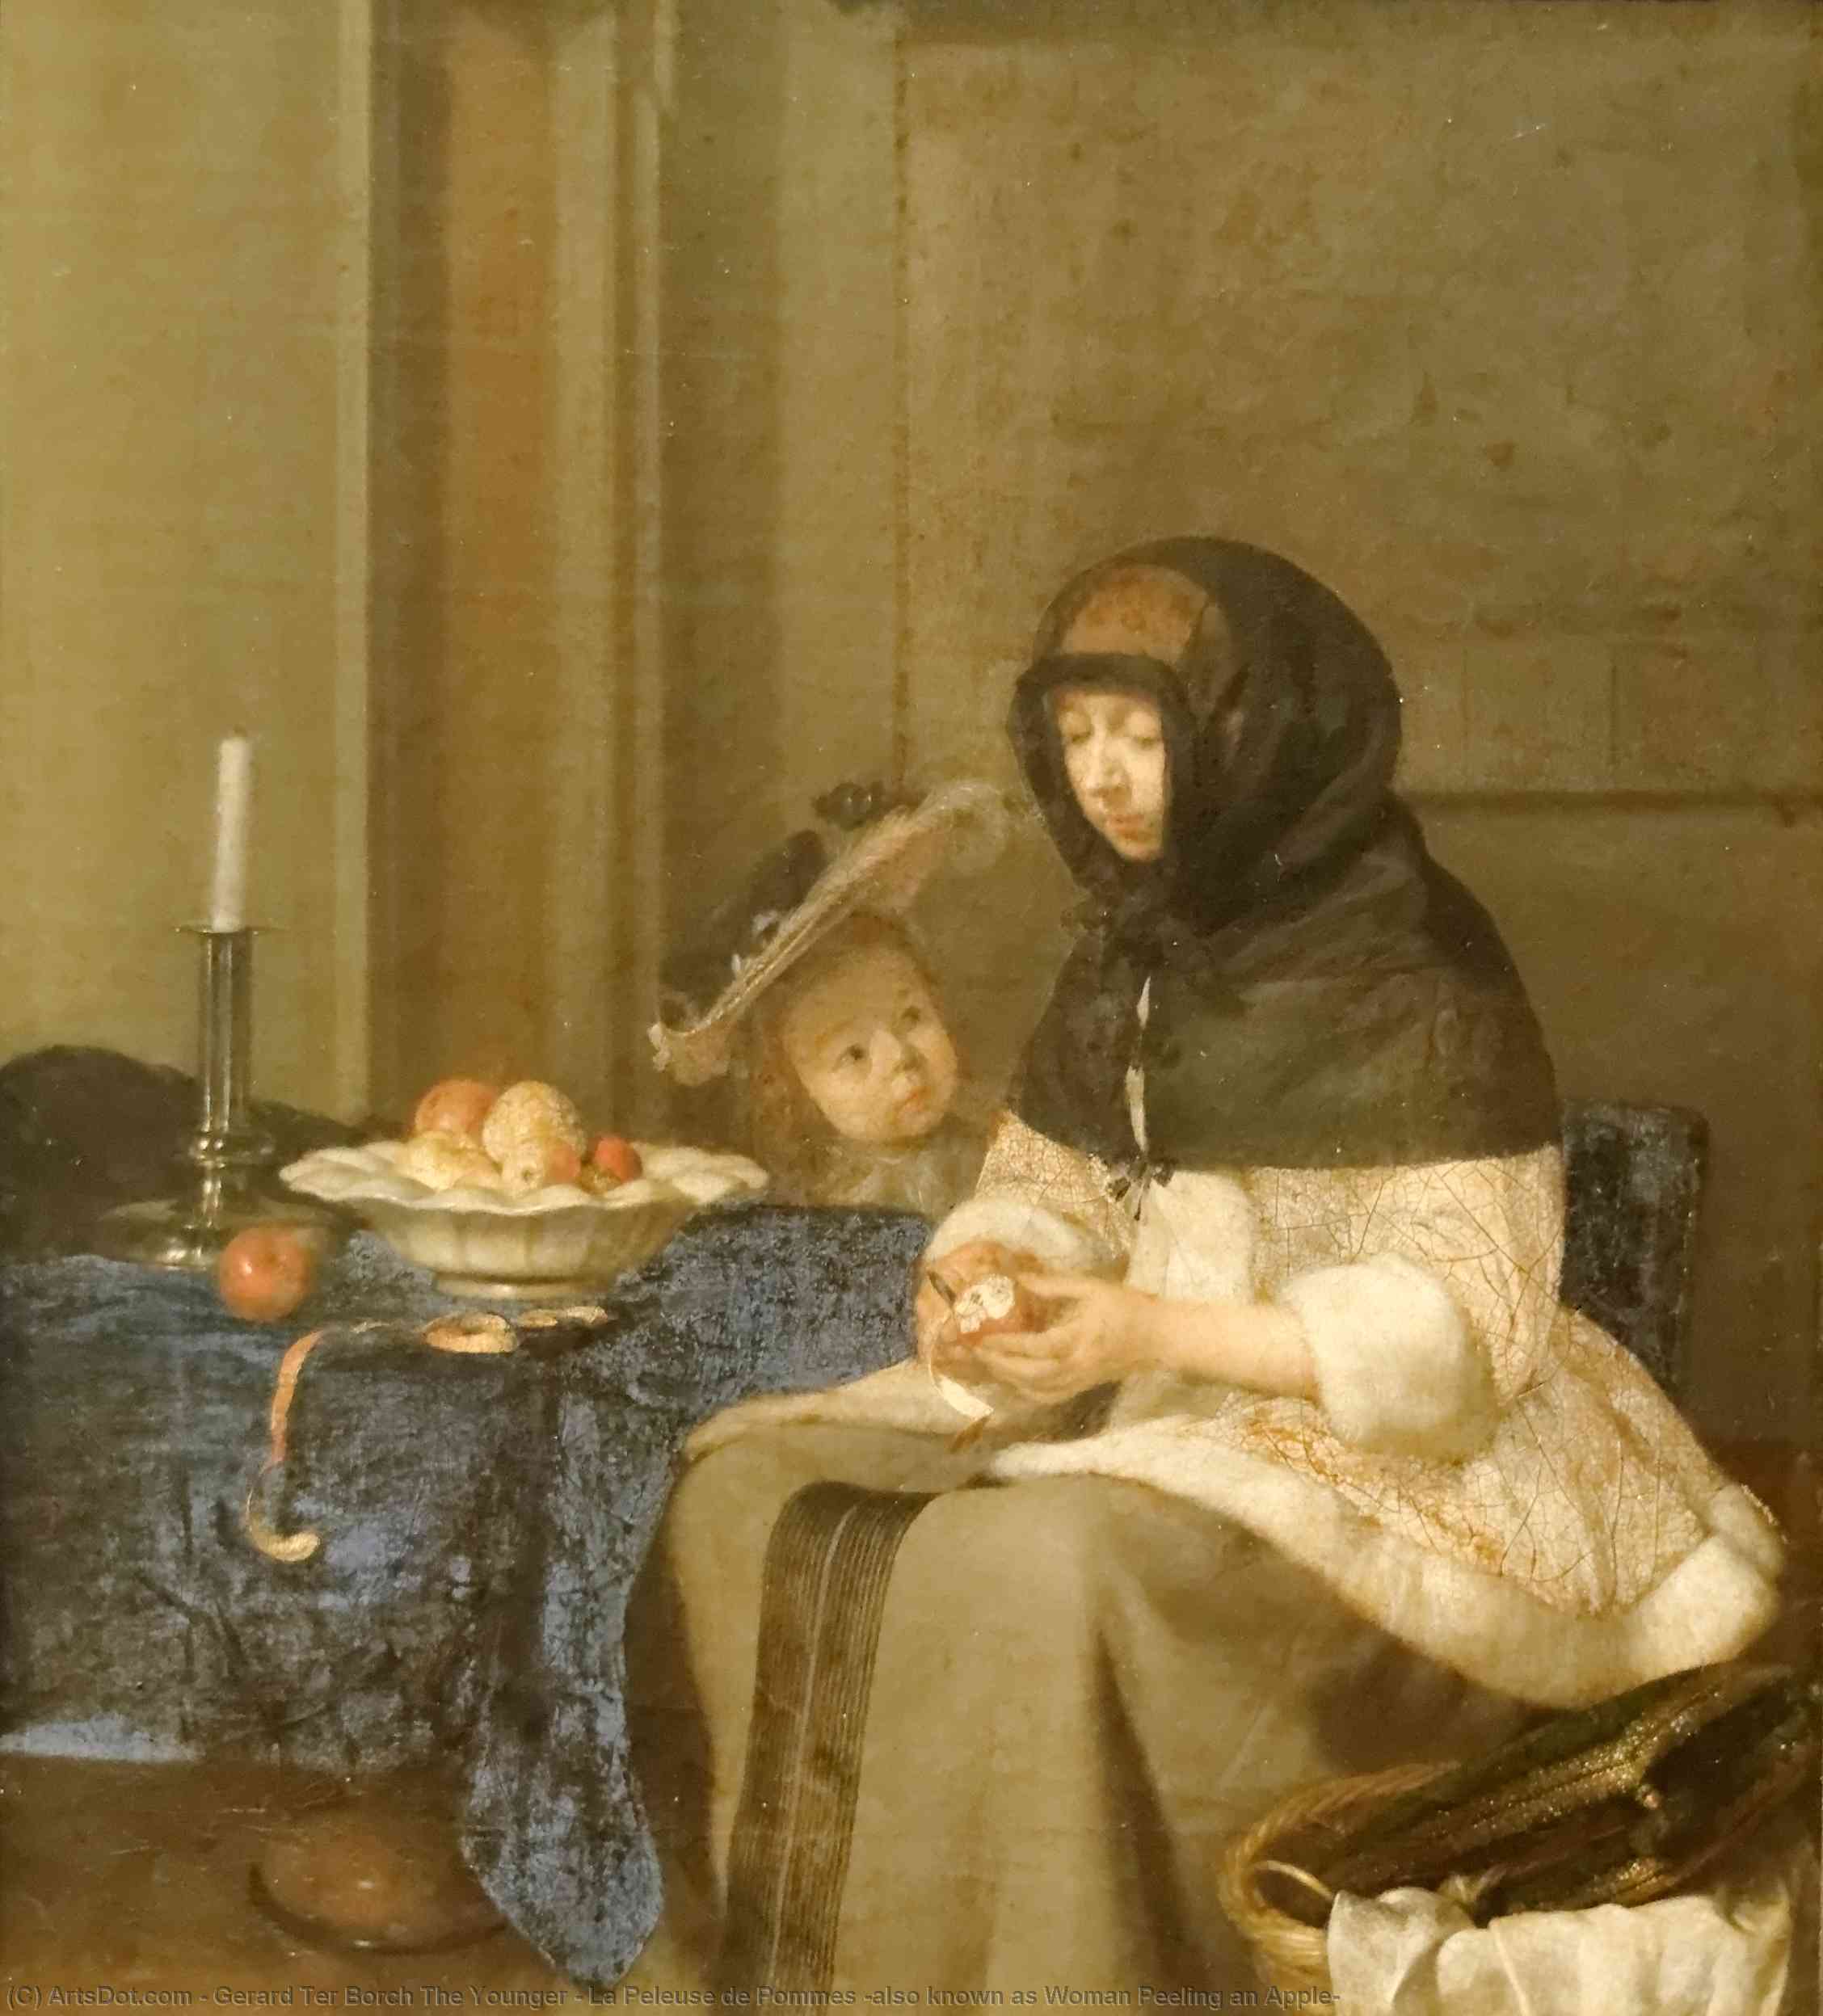 WikiOO.org - 백과 사전 - 회화, 삽화 Gerard Ter Borch The Younger - La Peleuse de Pommes (also known as Woman Peeling an Apple)